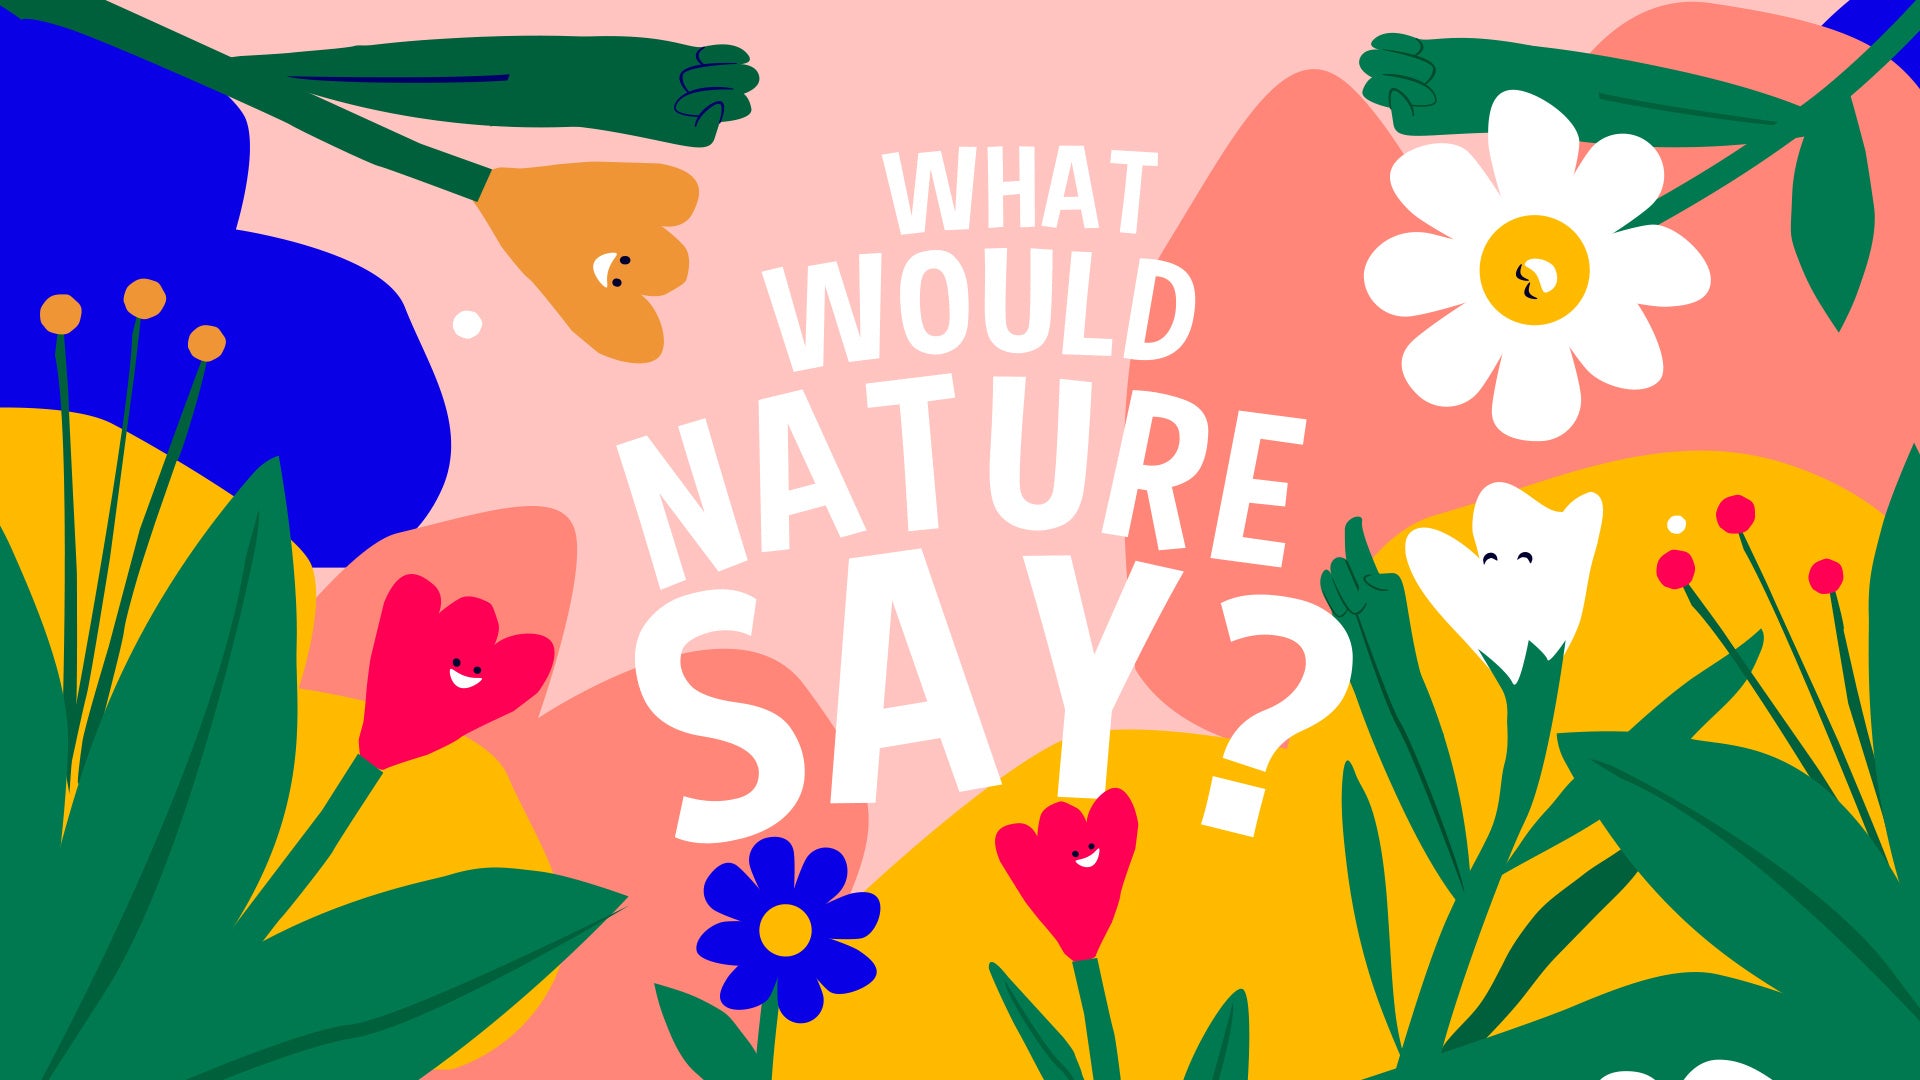 What would nature say?